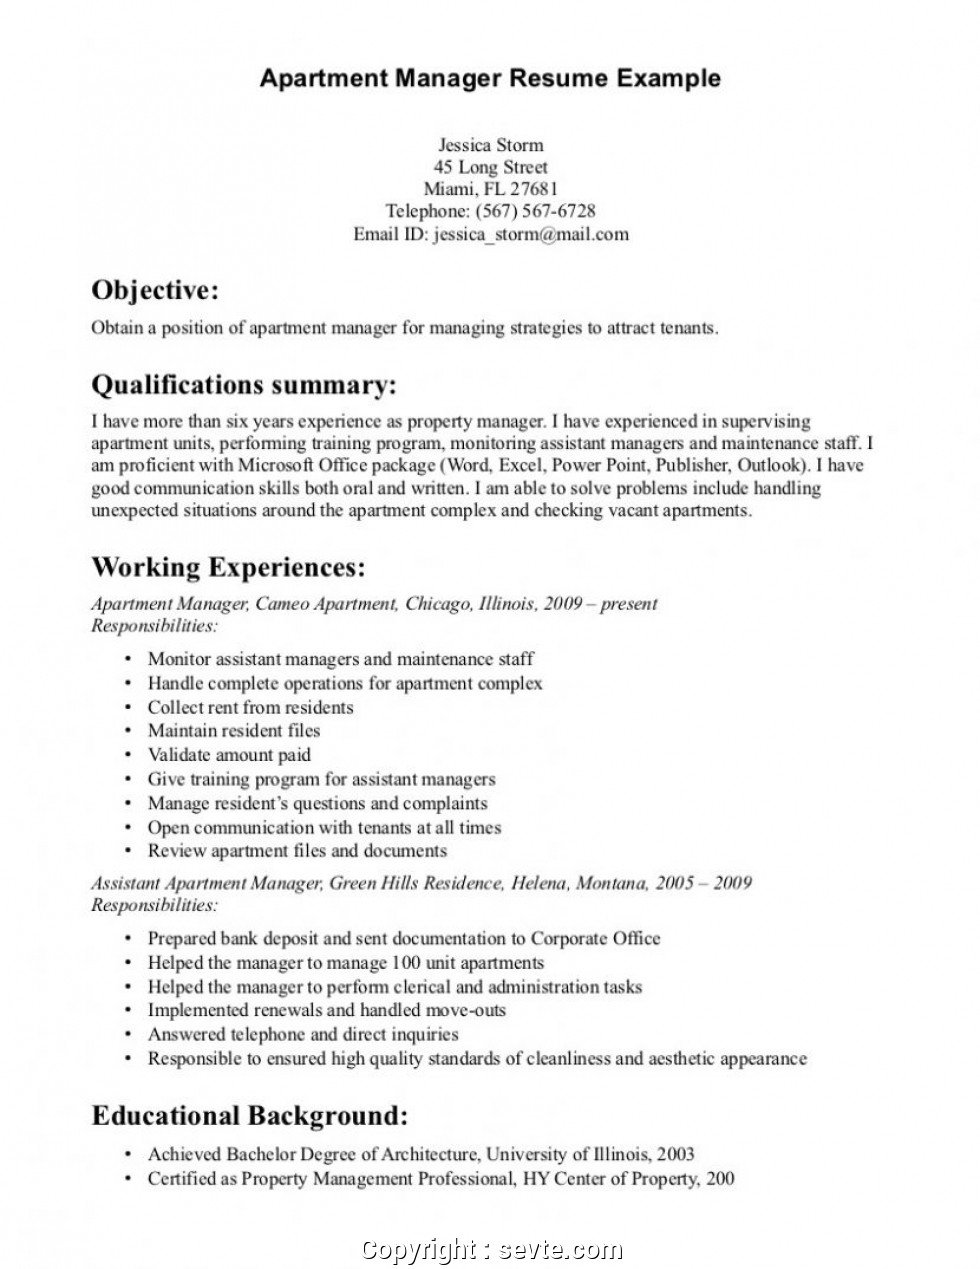 Creative Property Manager Resume Profile Property Manager ...